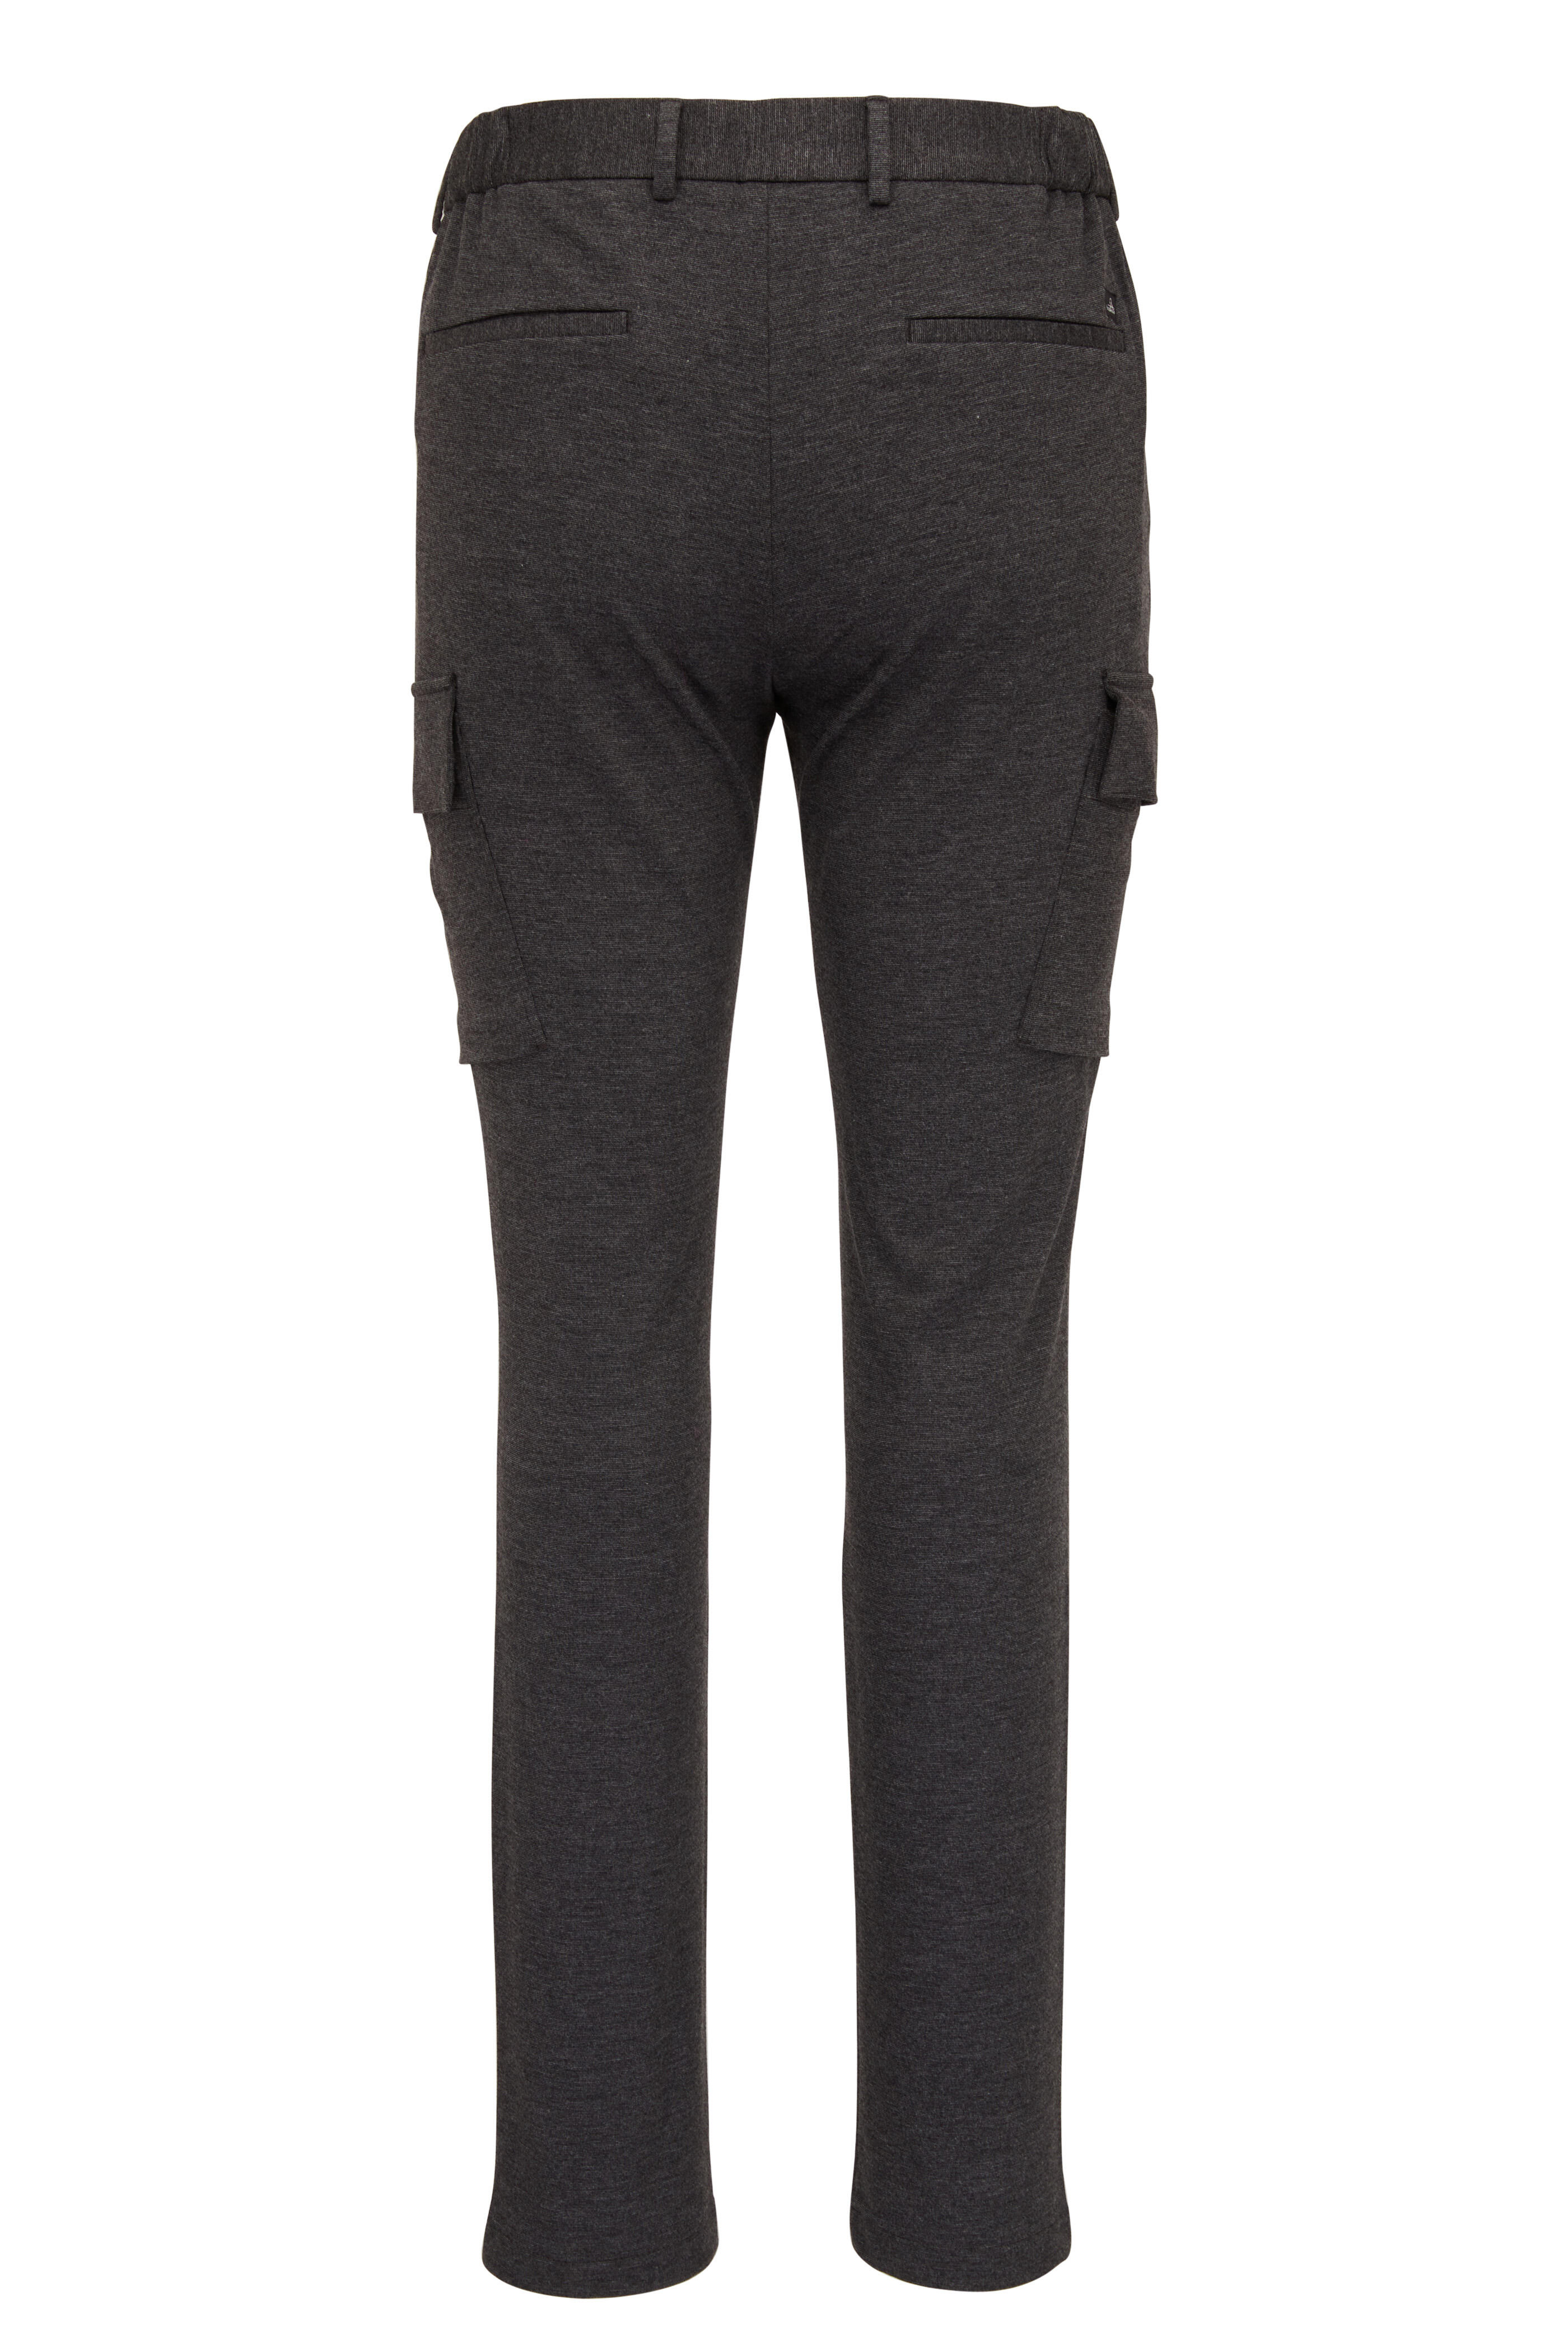 WAHTS - Dark Gray Mélange Cargo Pant | Mitchell Stores